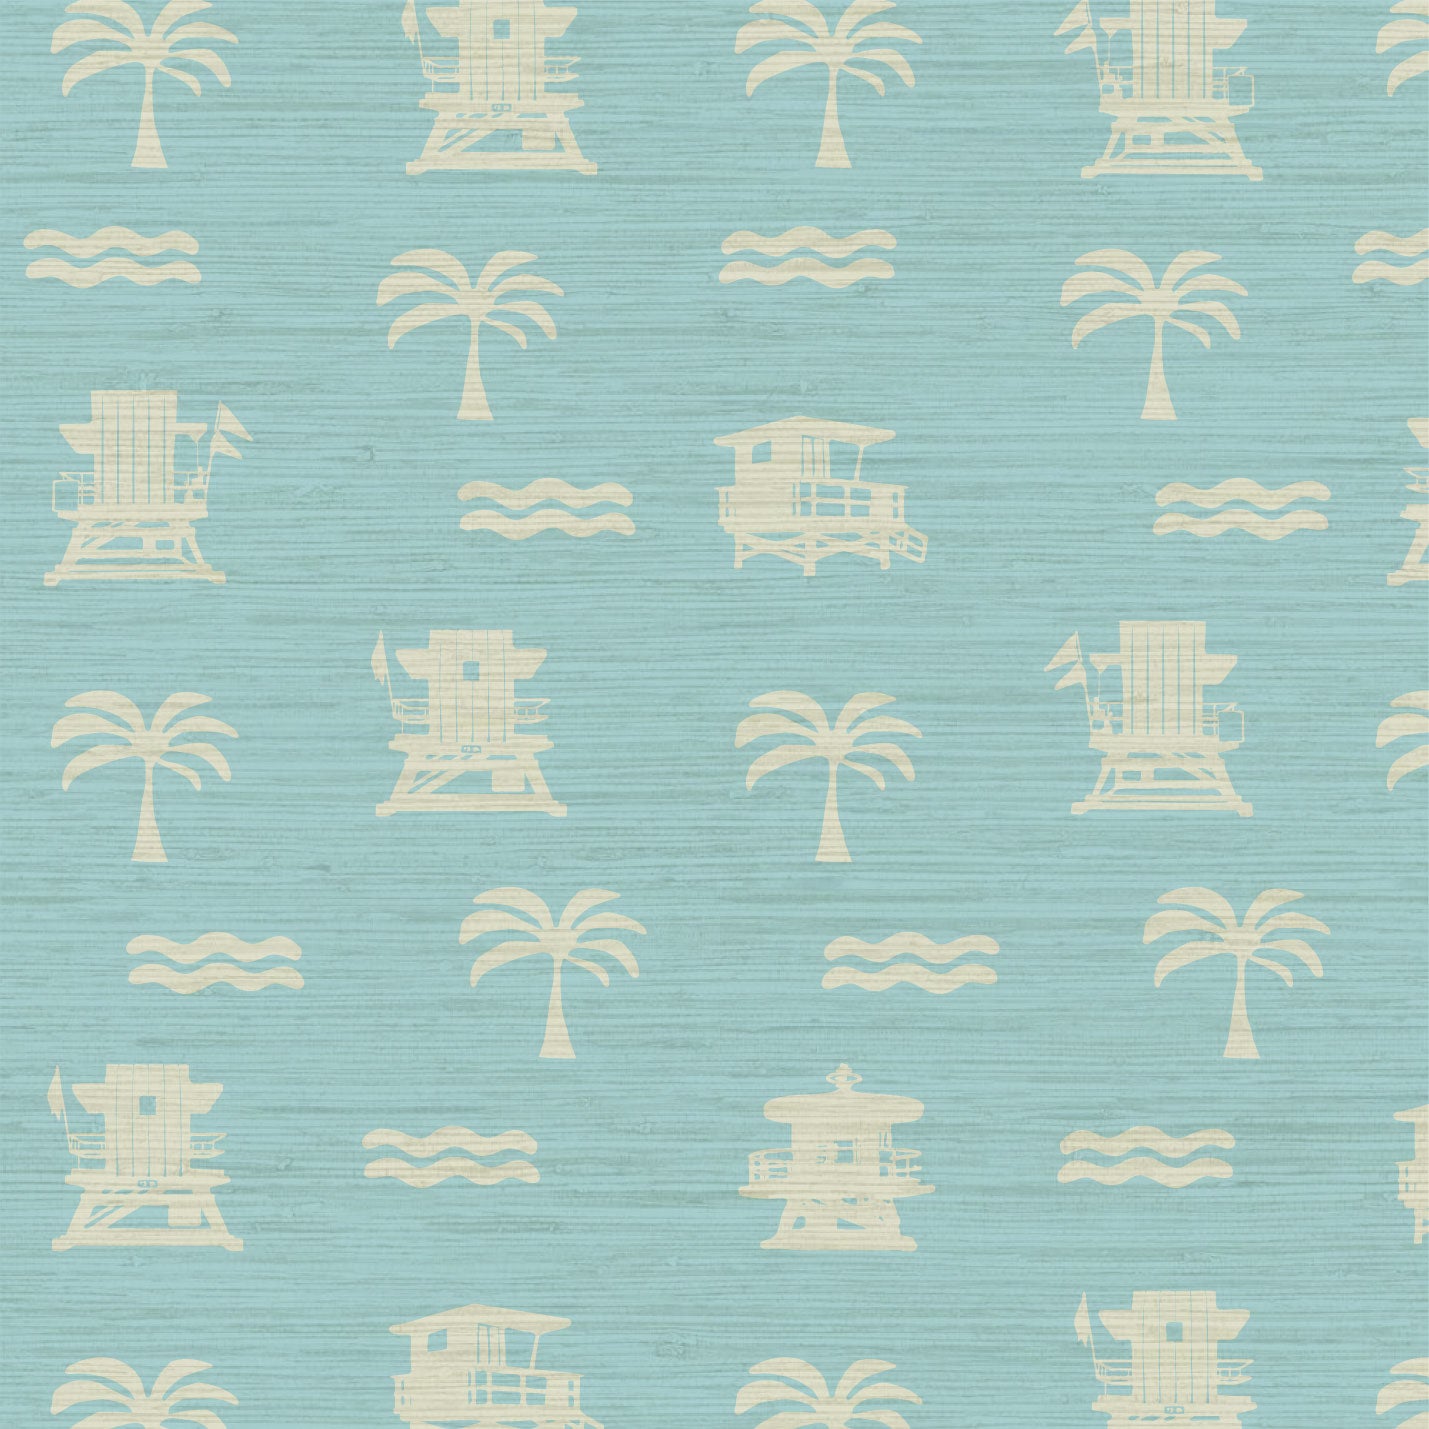 blue base grasscloth wallpaper with white print of lifeguard stands, waves and palm trees in a mini icon print